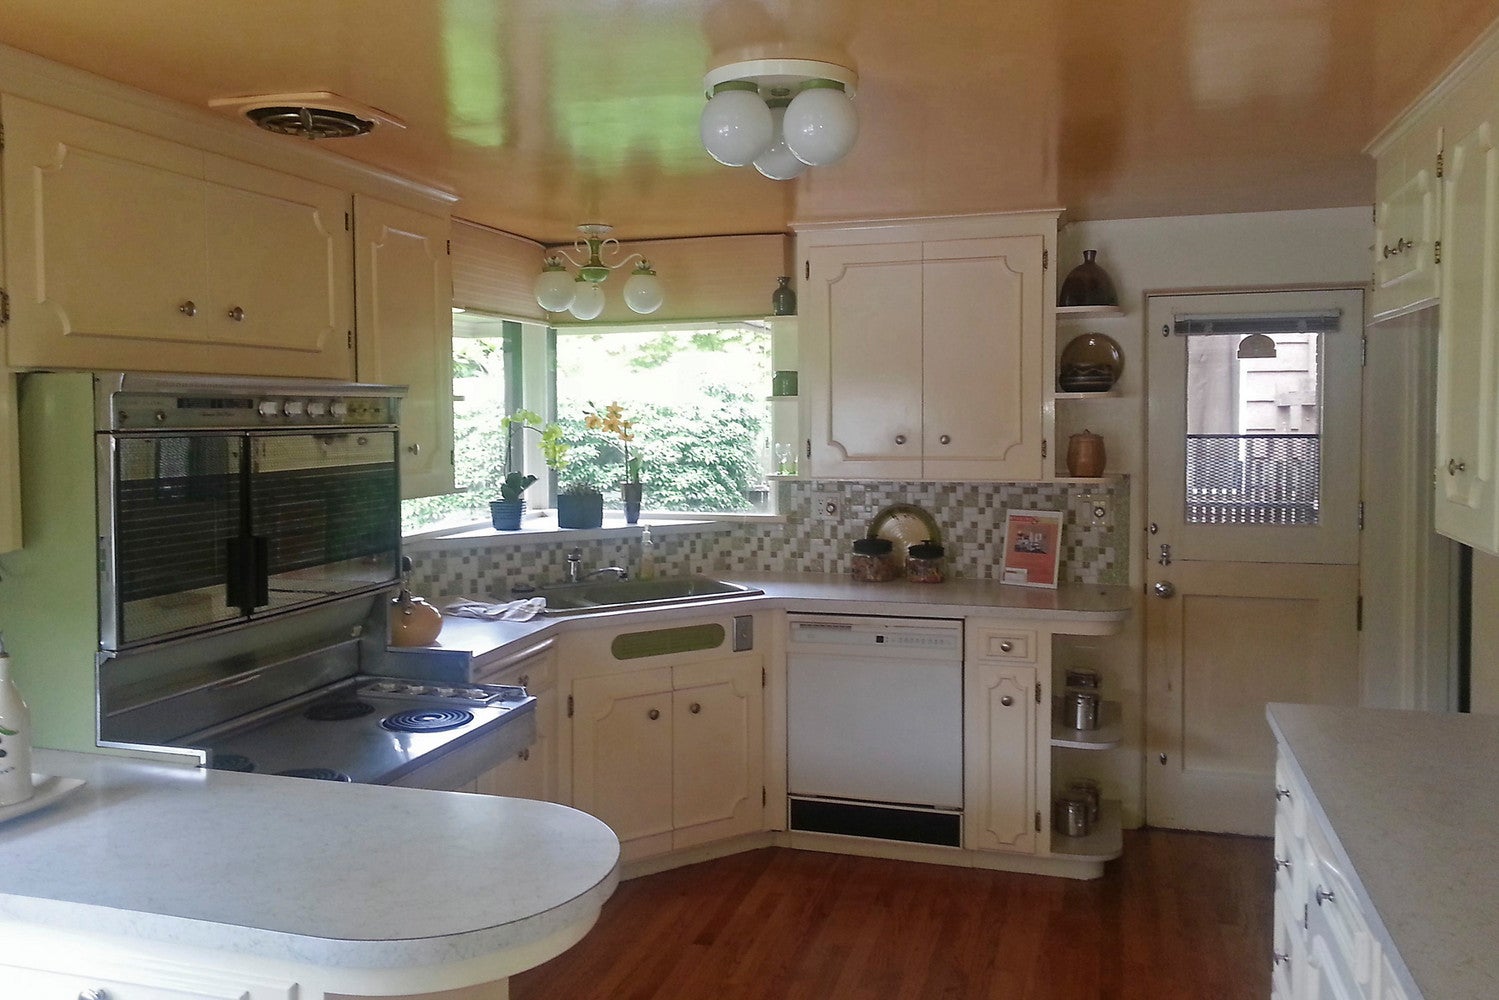 Pastel Colors Rule in This Updated Retro 1950s Kitchen